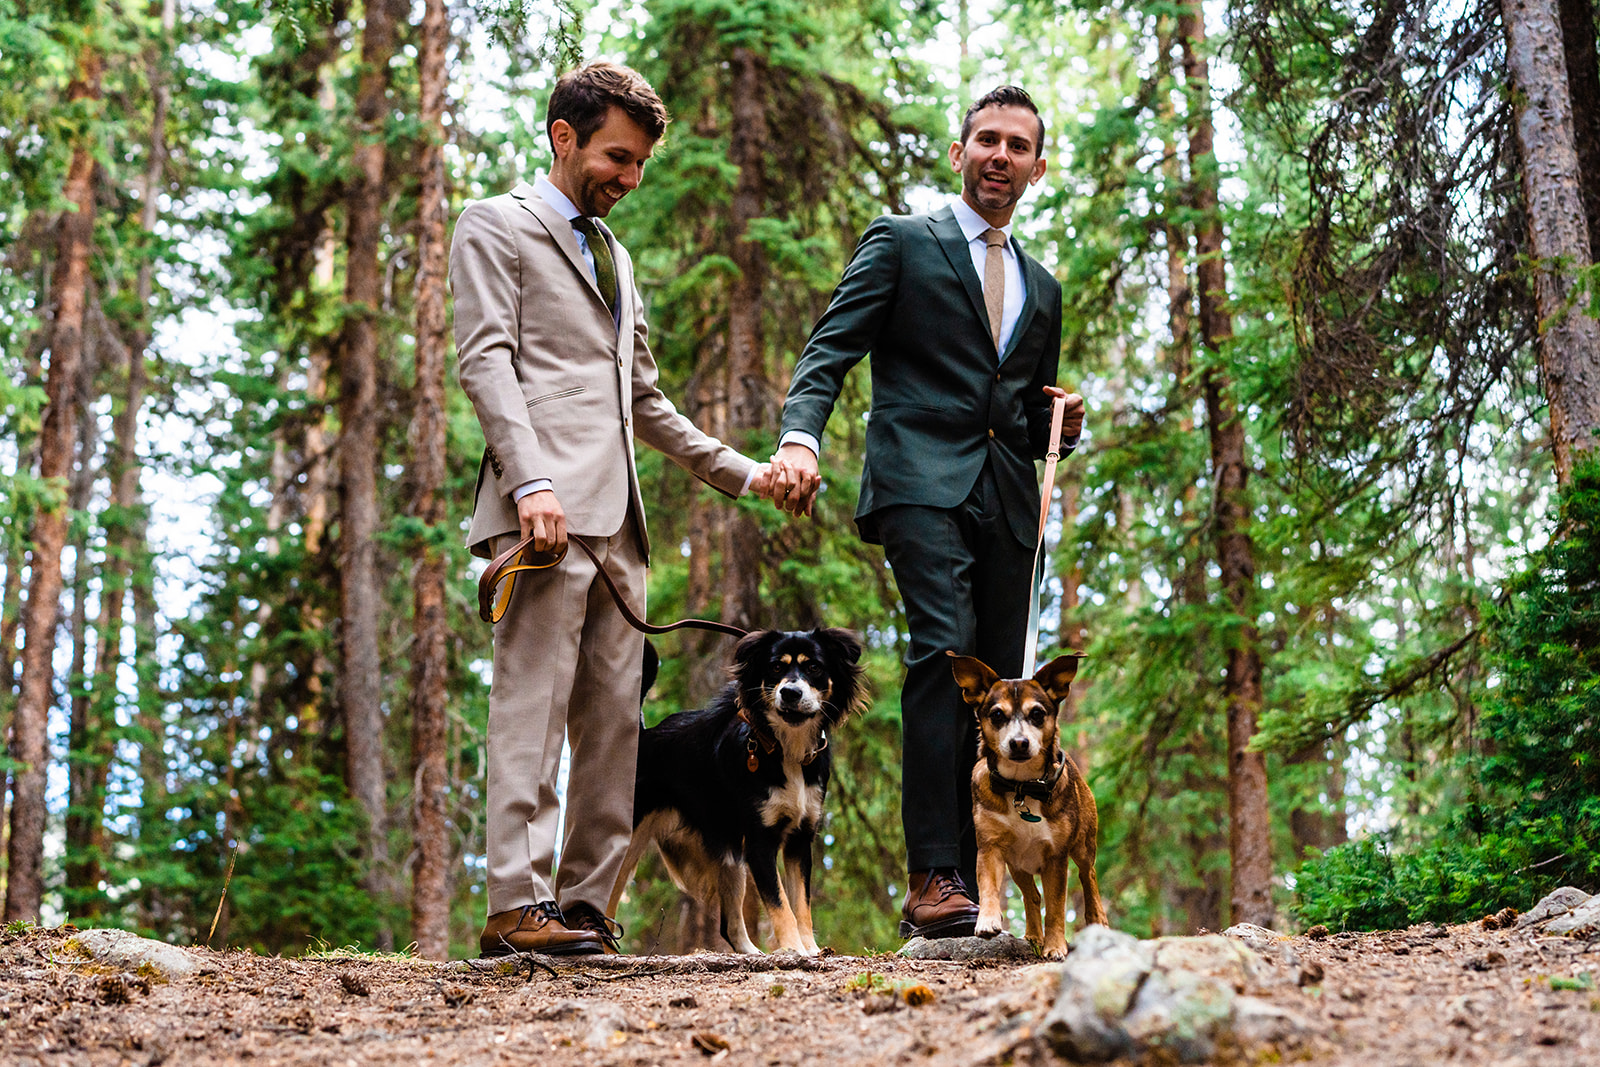 Adventure Gay Elopement in Breckenridge, CO with dreamy backdrops and mountain views